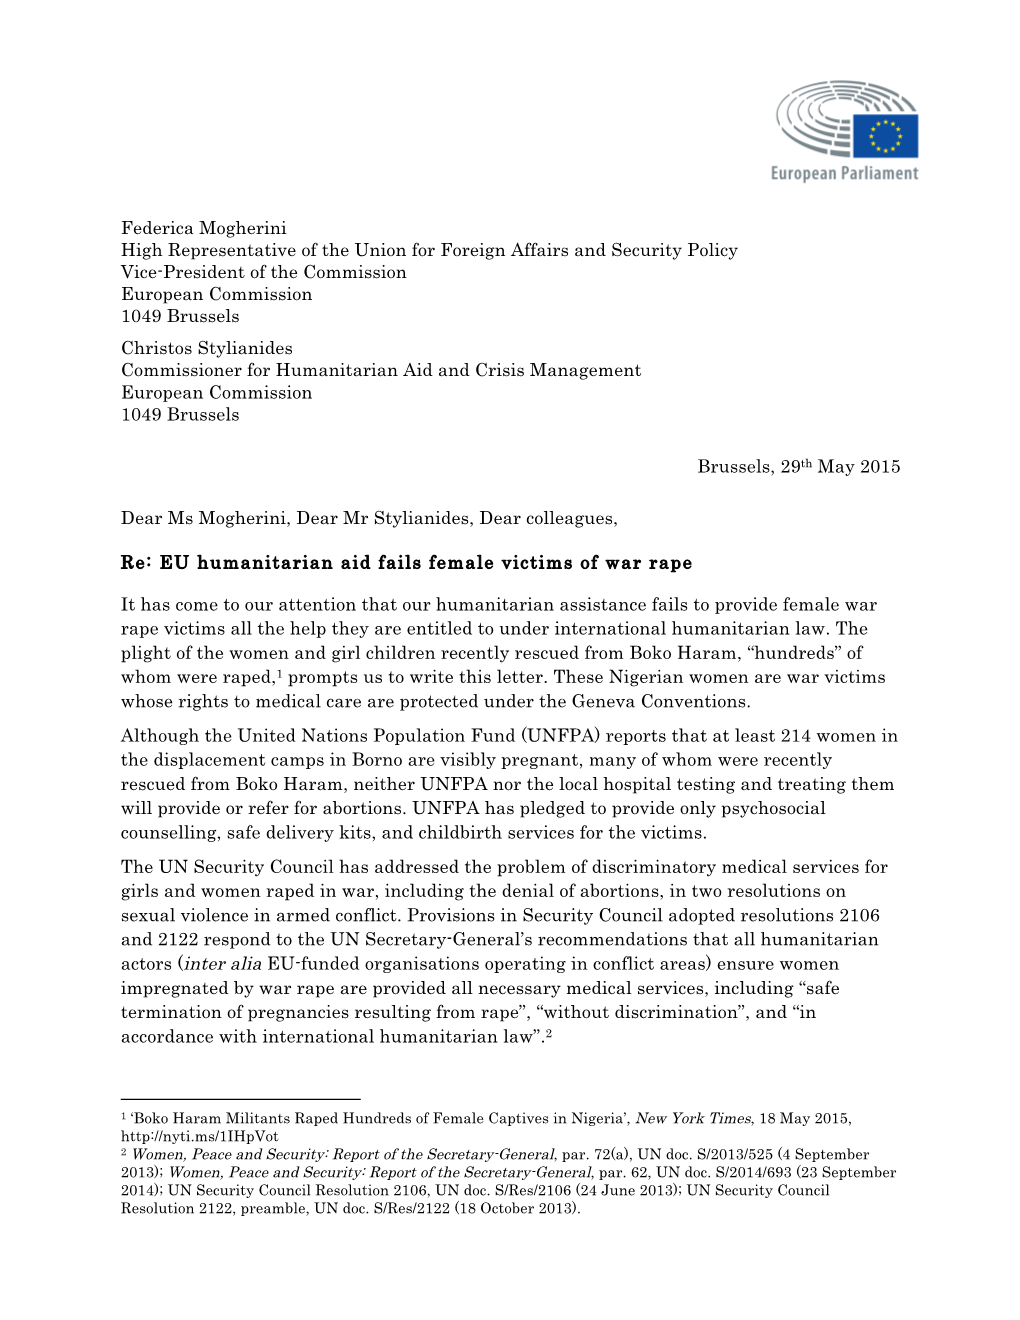 20150529 Sign-On Letter to Mogherini and Stylianides